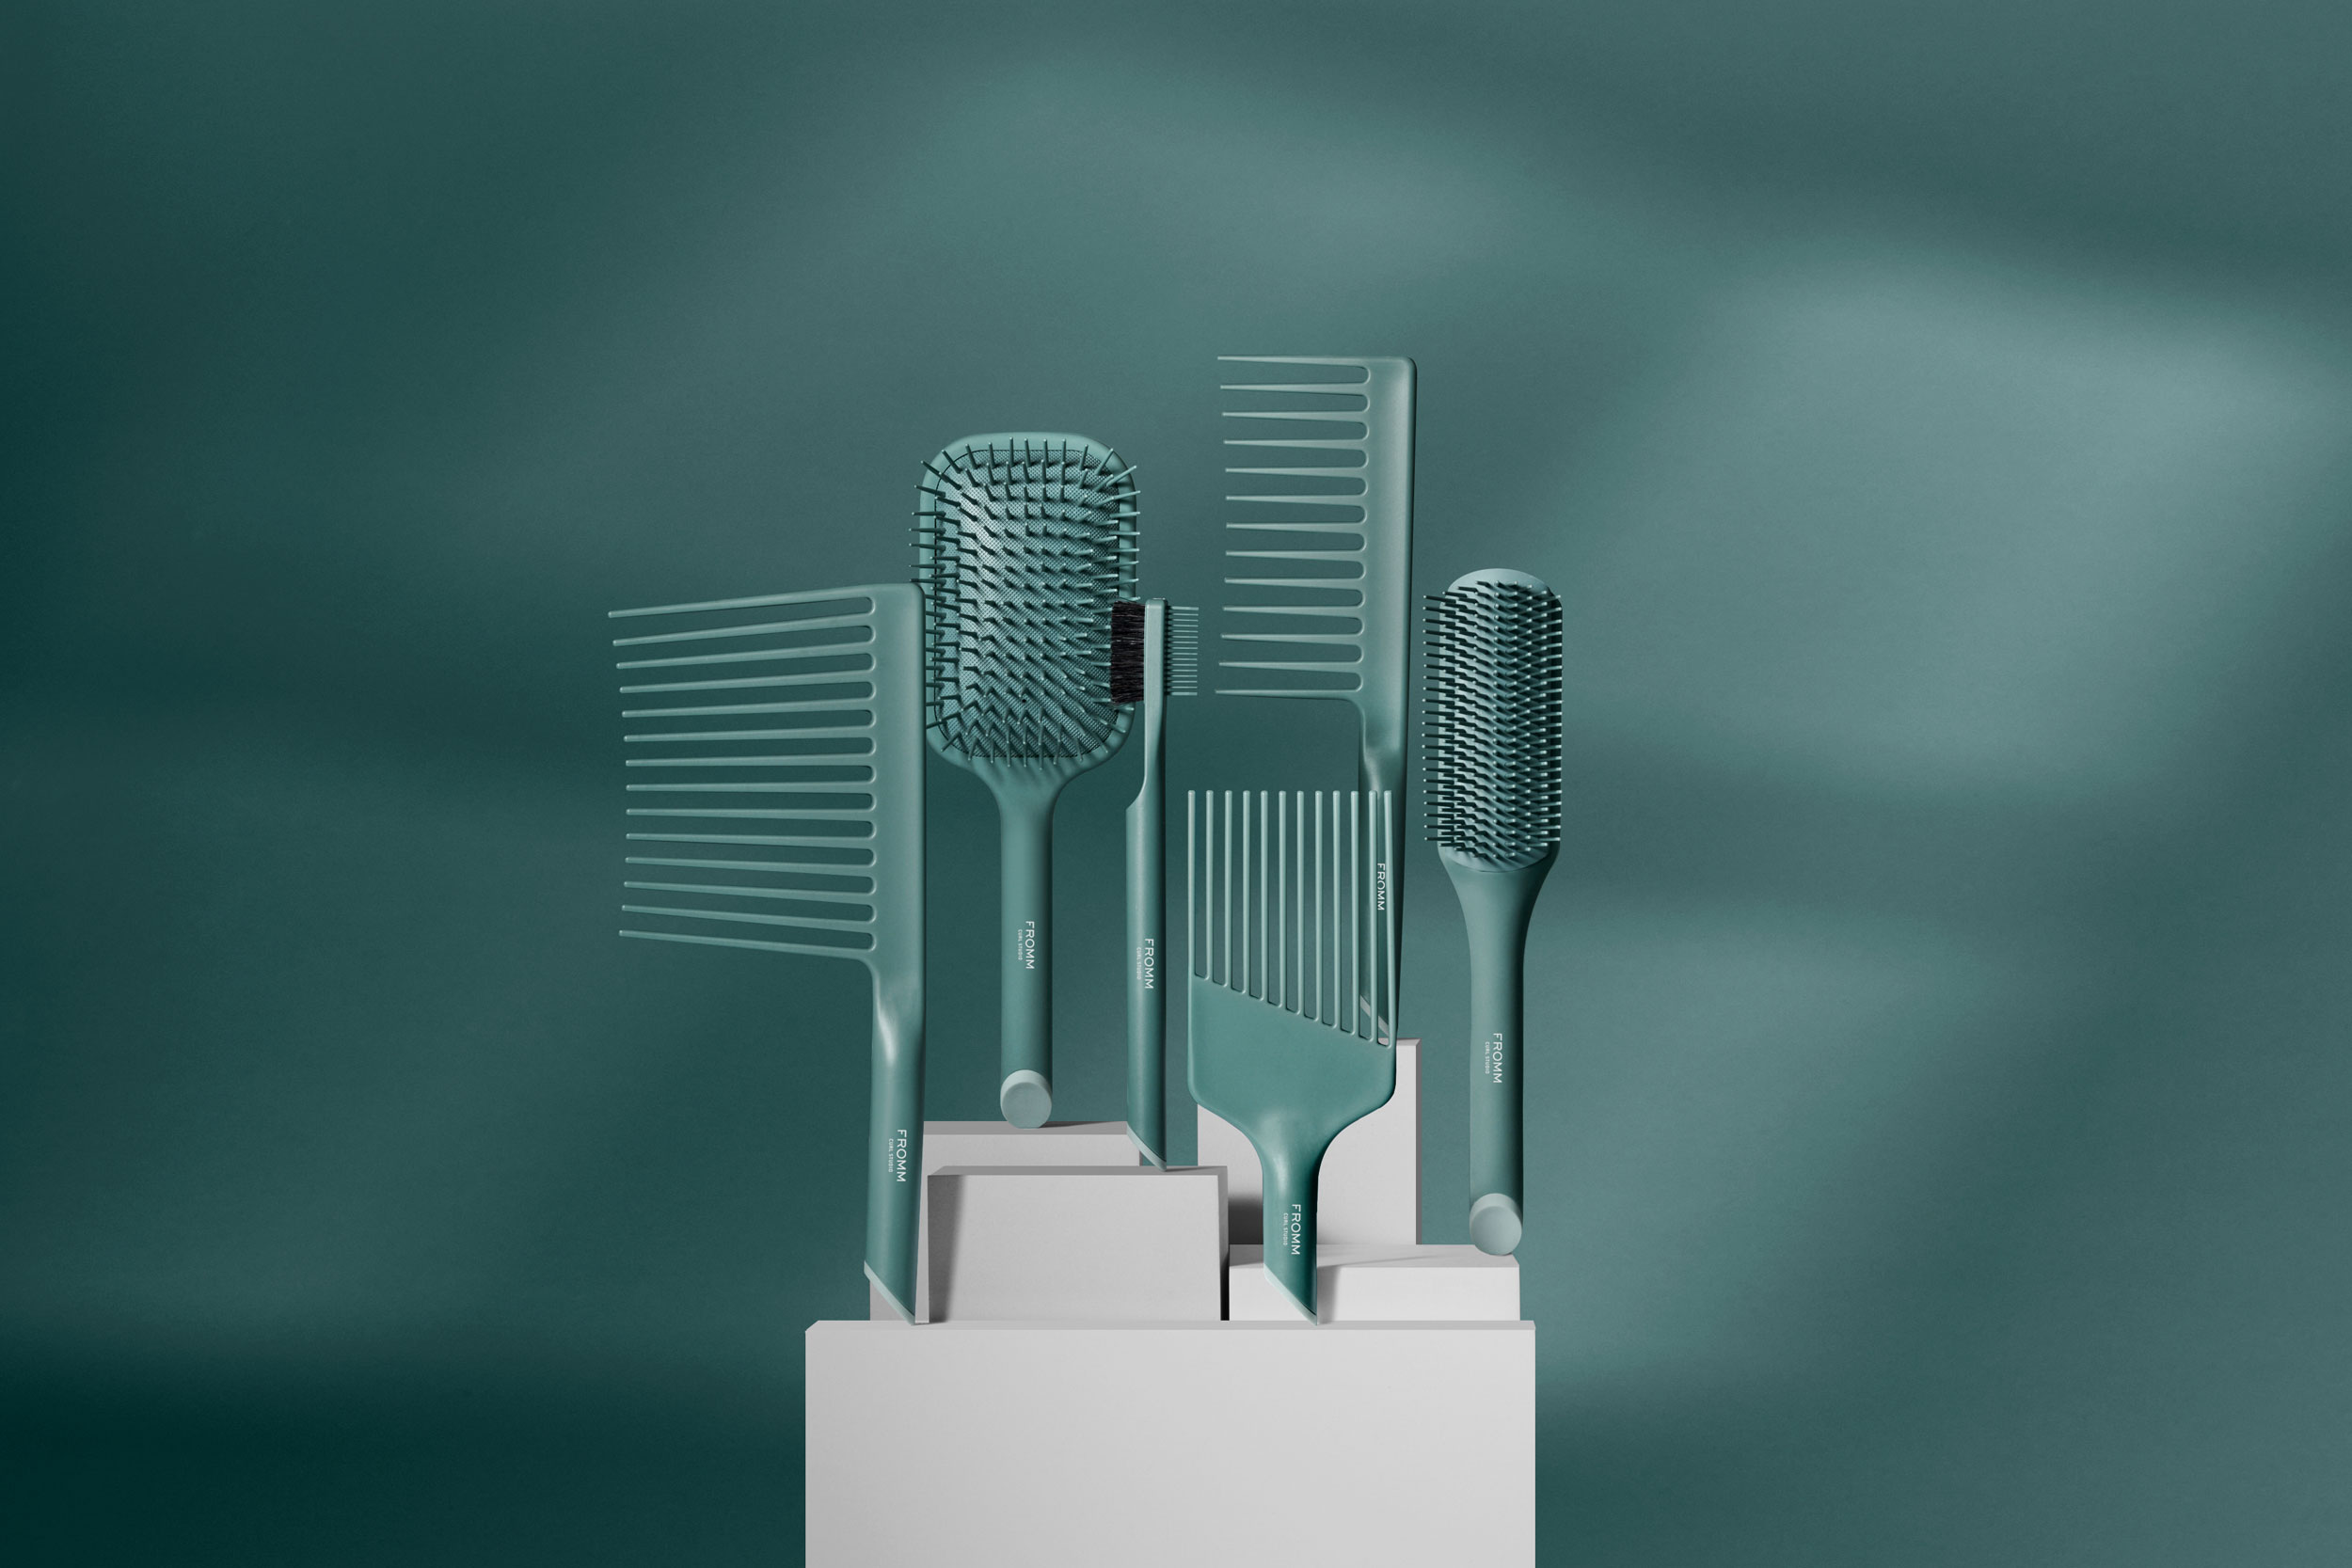 Collection of green brushes and combs suspended vertically on pedestals